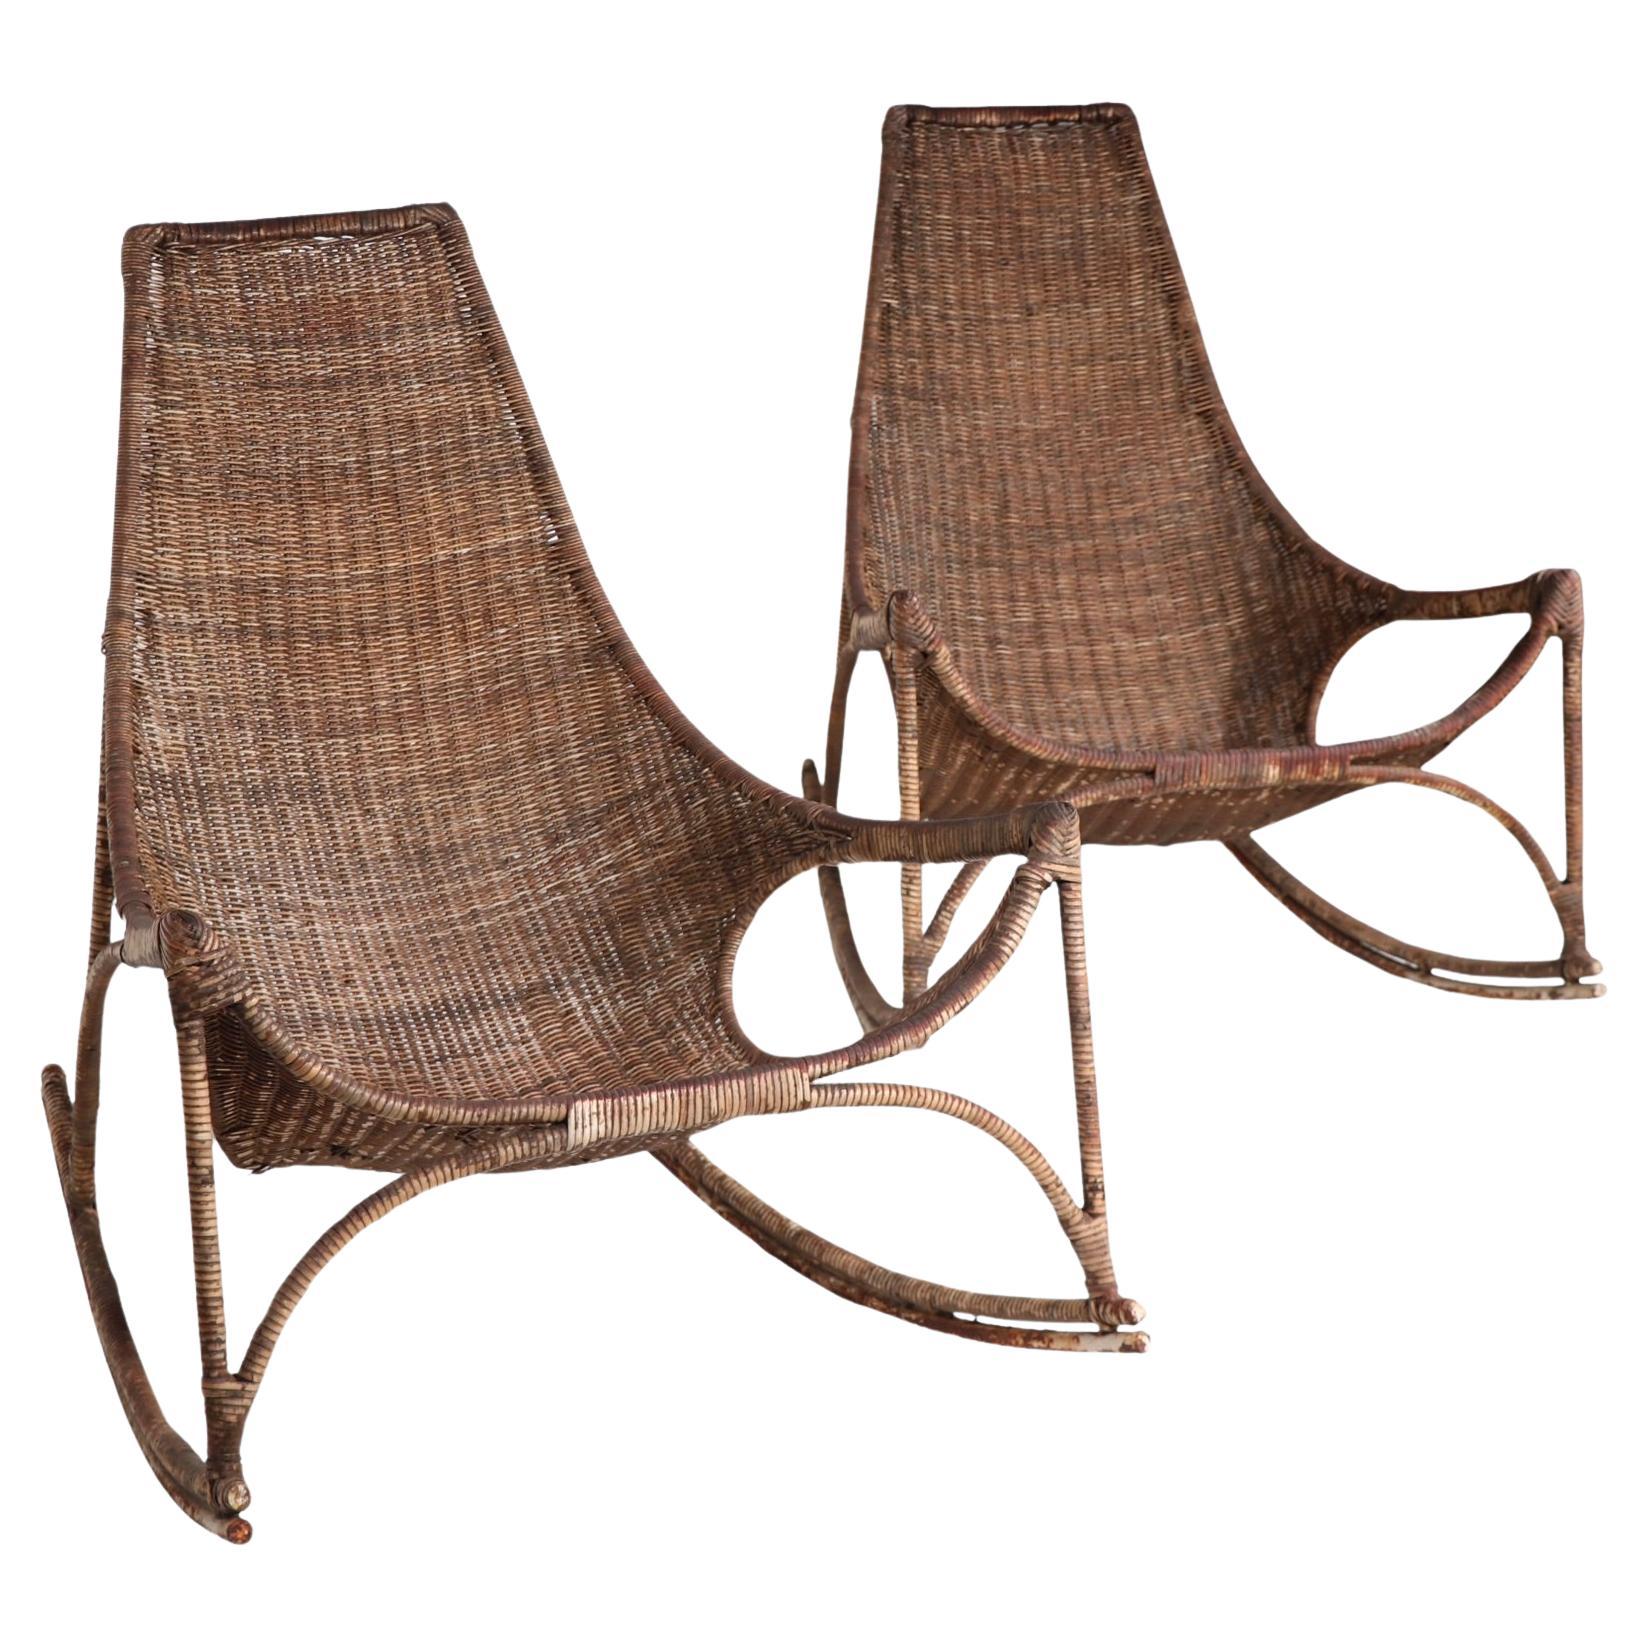 Pr. Wicker Rocking Chairs by Francis Mair c 1950/1960's For Sale